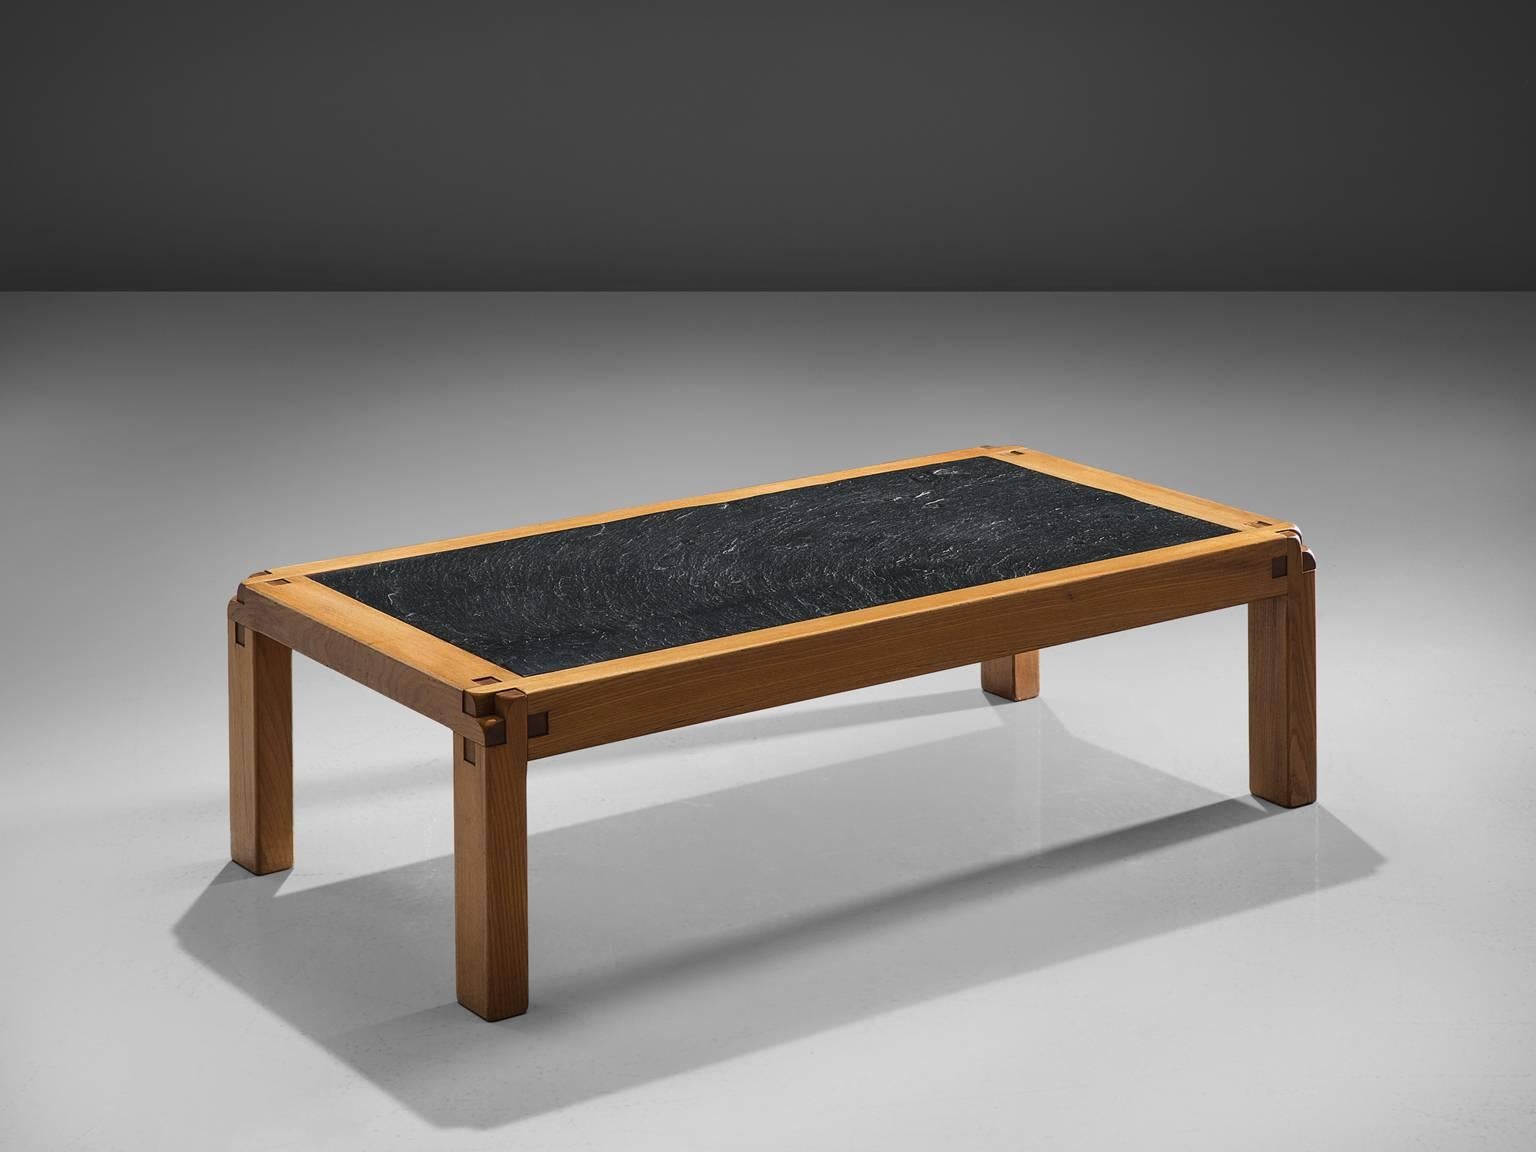 Pierre Chapo, coffee table T18V, elm and enameled lava stone, France, 1960s.

The top of this table is constituted by solid elm and a slab of enamelled lava of a single color. The table is, like many other designs, based on Chapo's 48 x 72